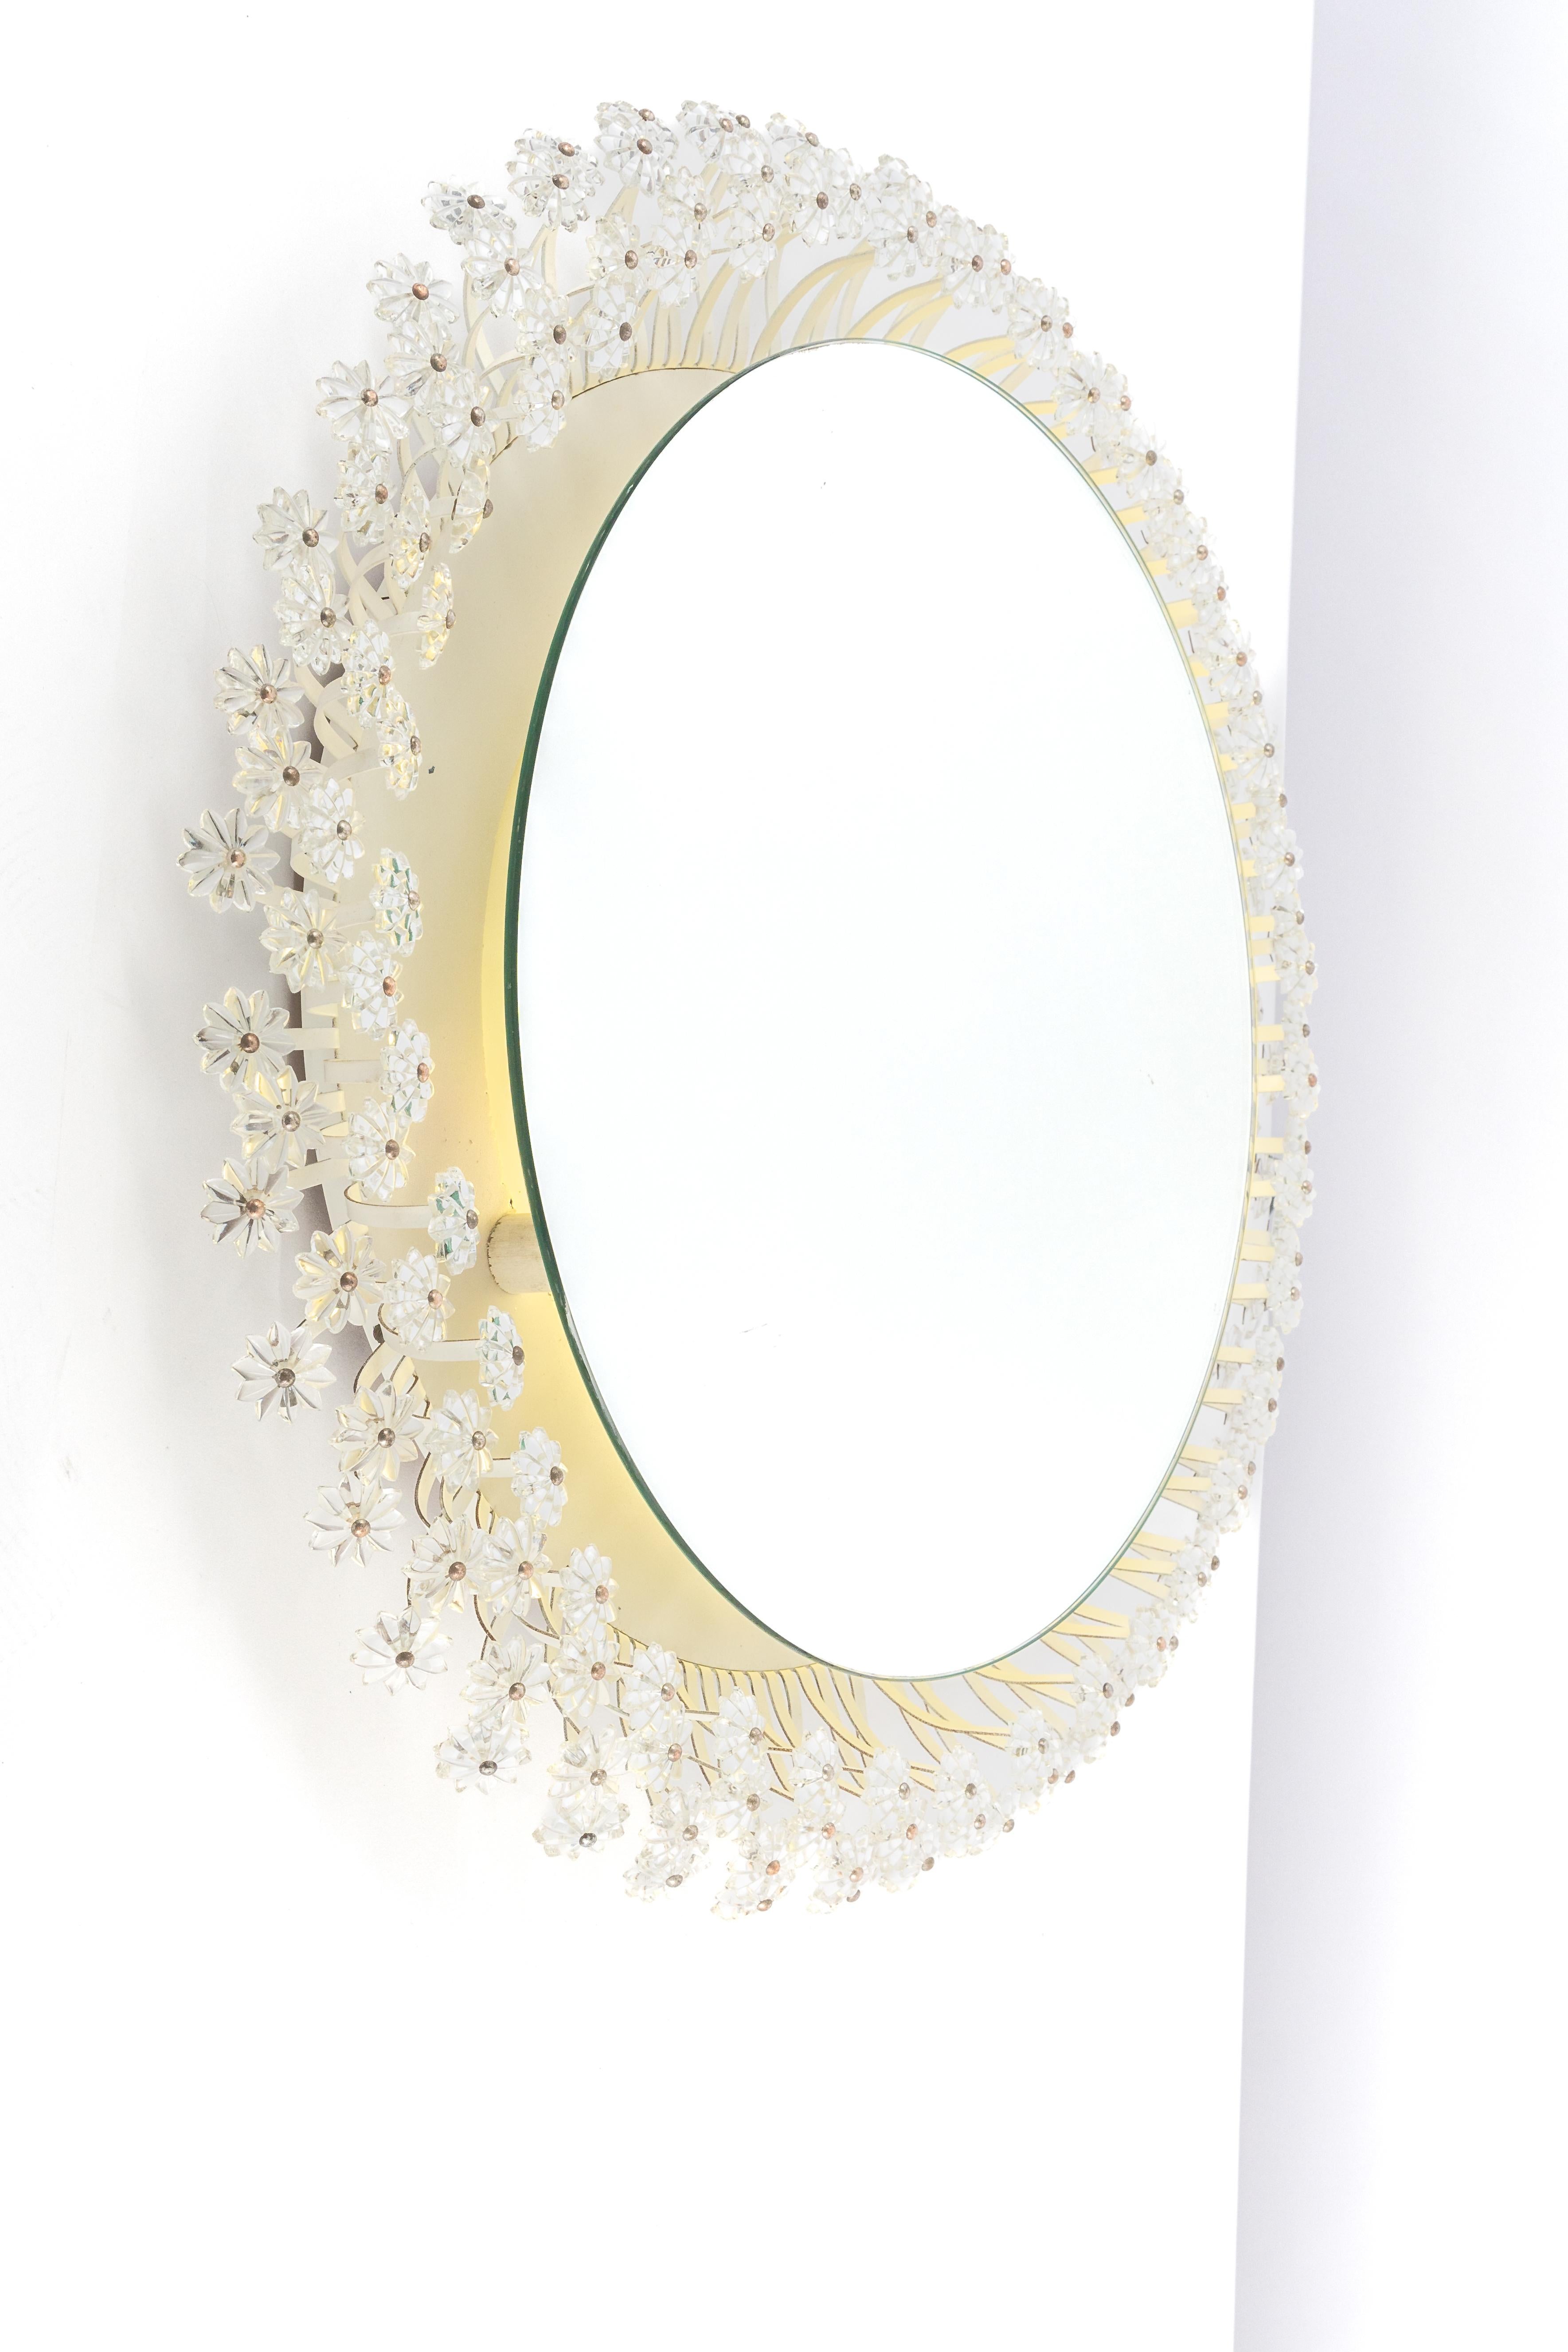 A wonderful and high quality wall mirror by Emil Stejnar, Germany, 1970s
It is made of a metal frame decorated with hundreds of cut crystal glass. 

High quality and in very good condition. Cleaned, well-wired, and ready to use. 
The mirror can be